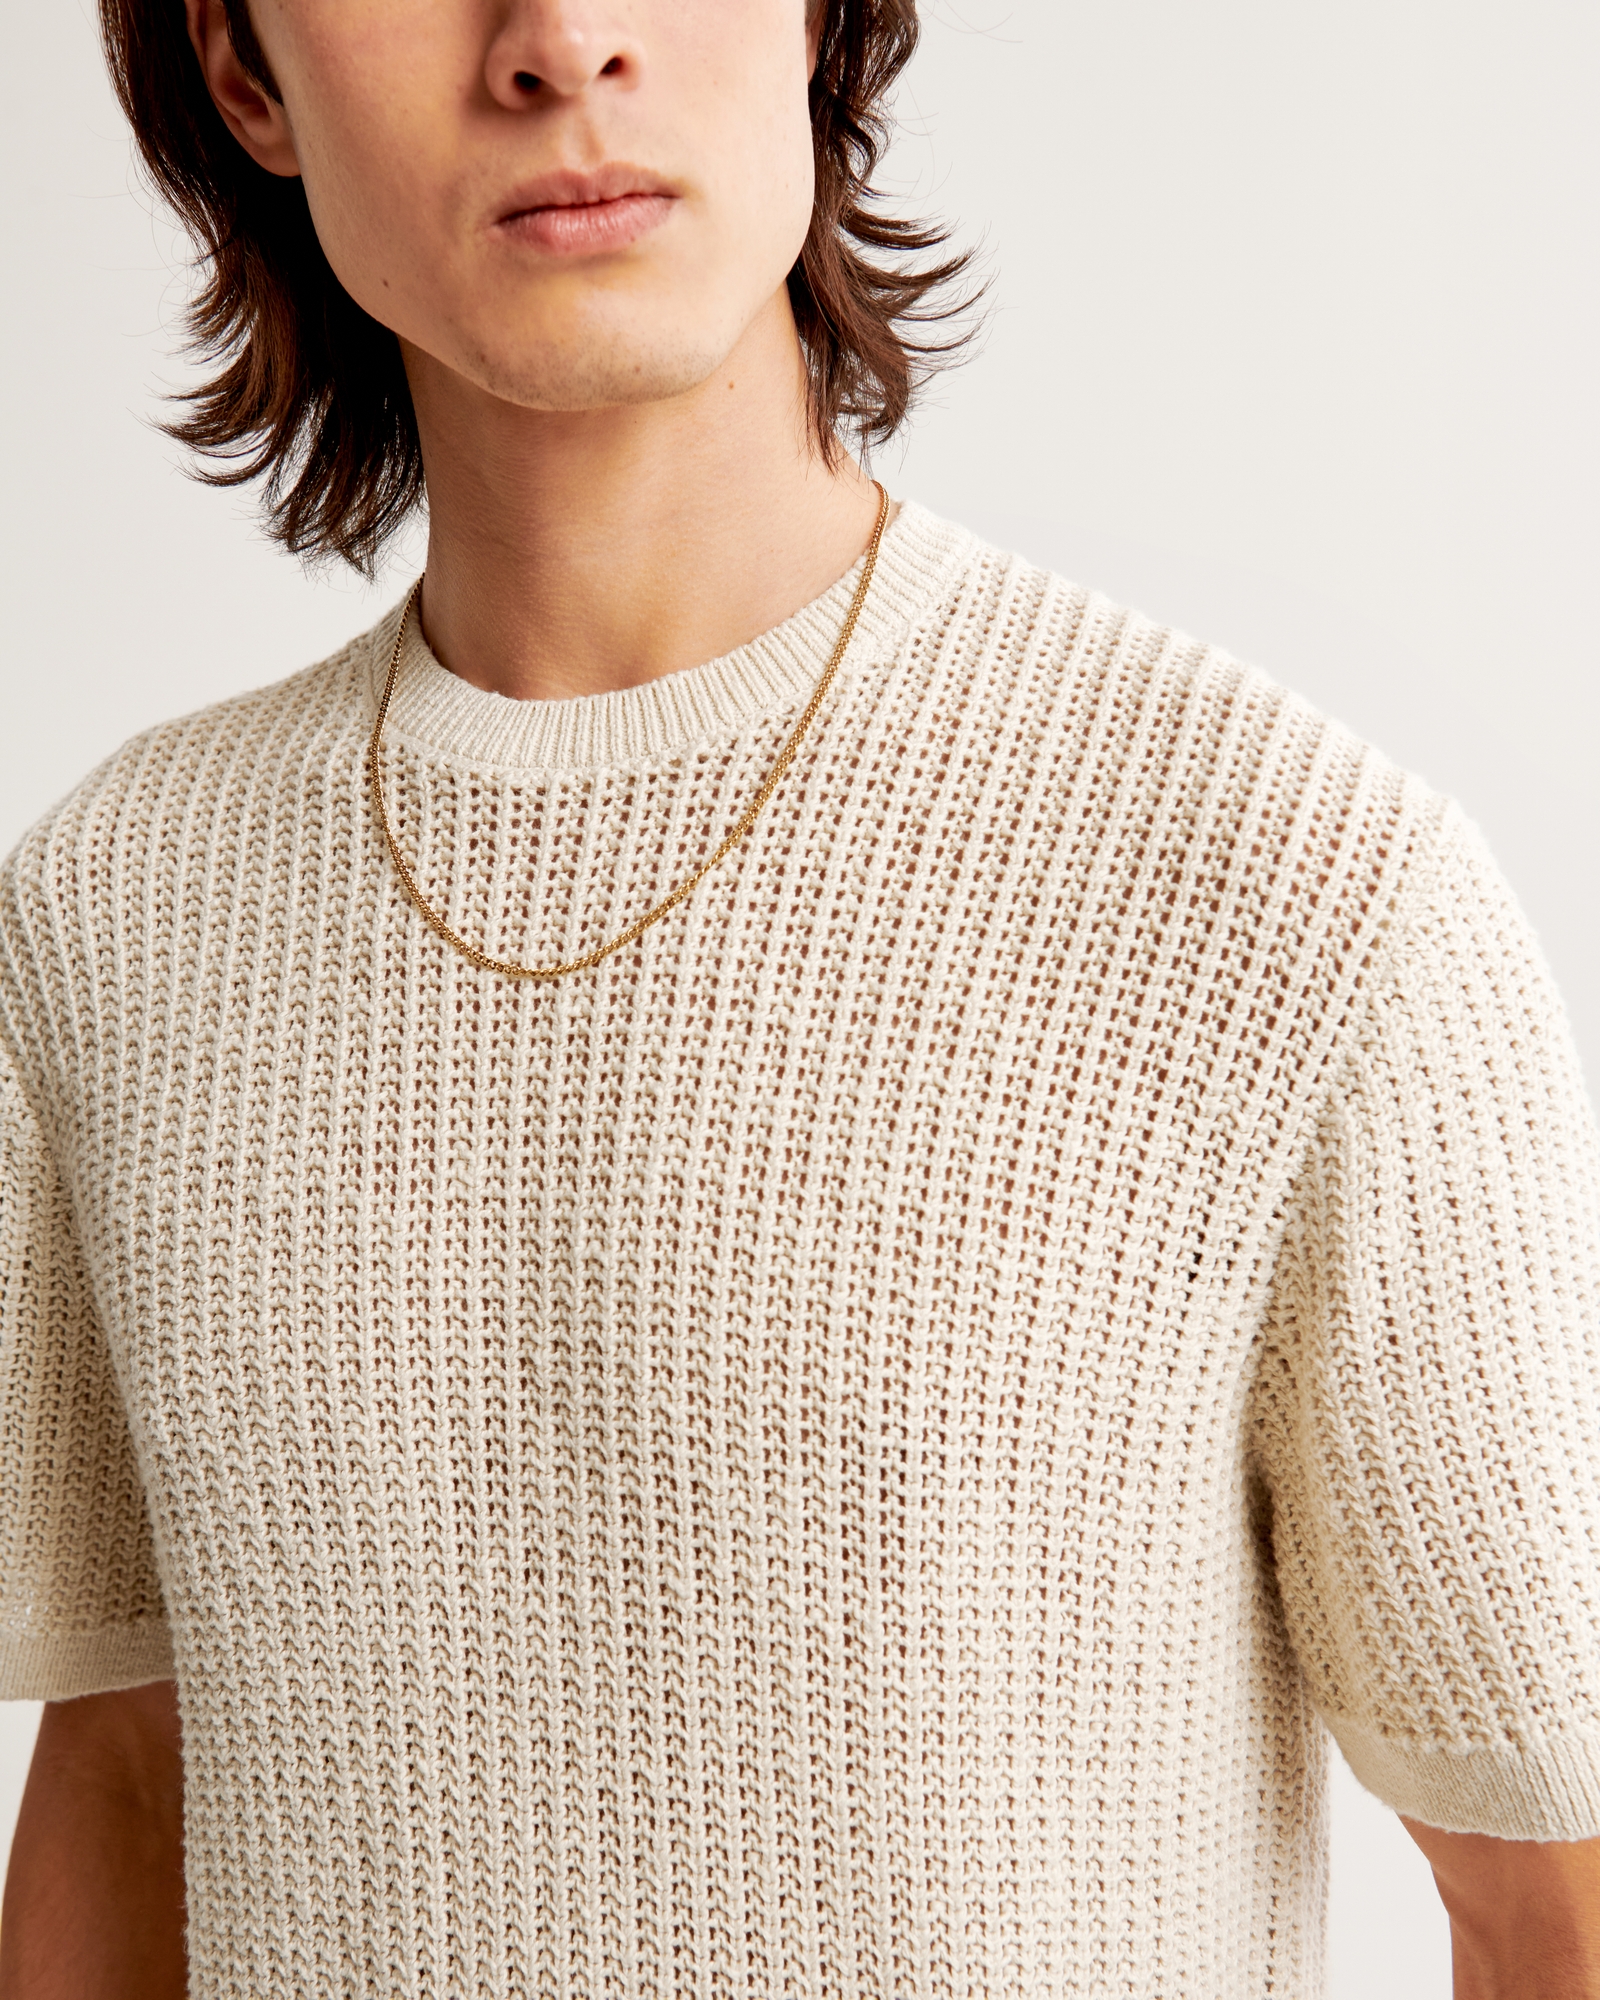 Stitched Sweater Tee